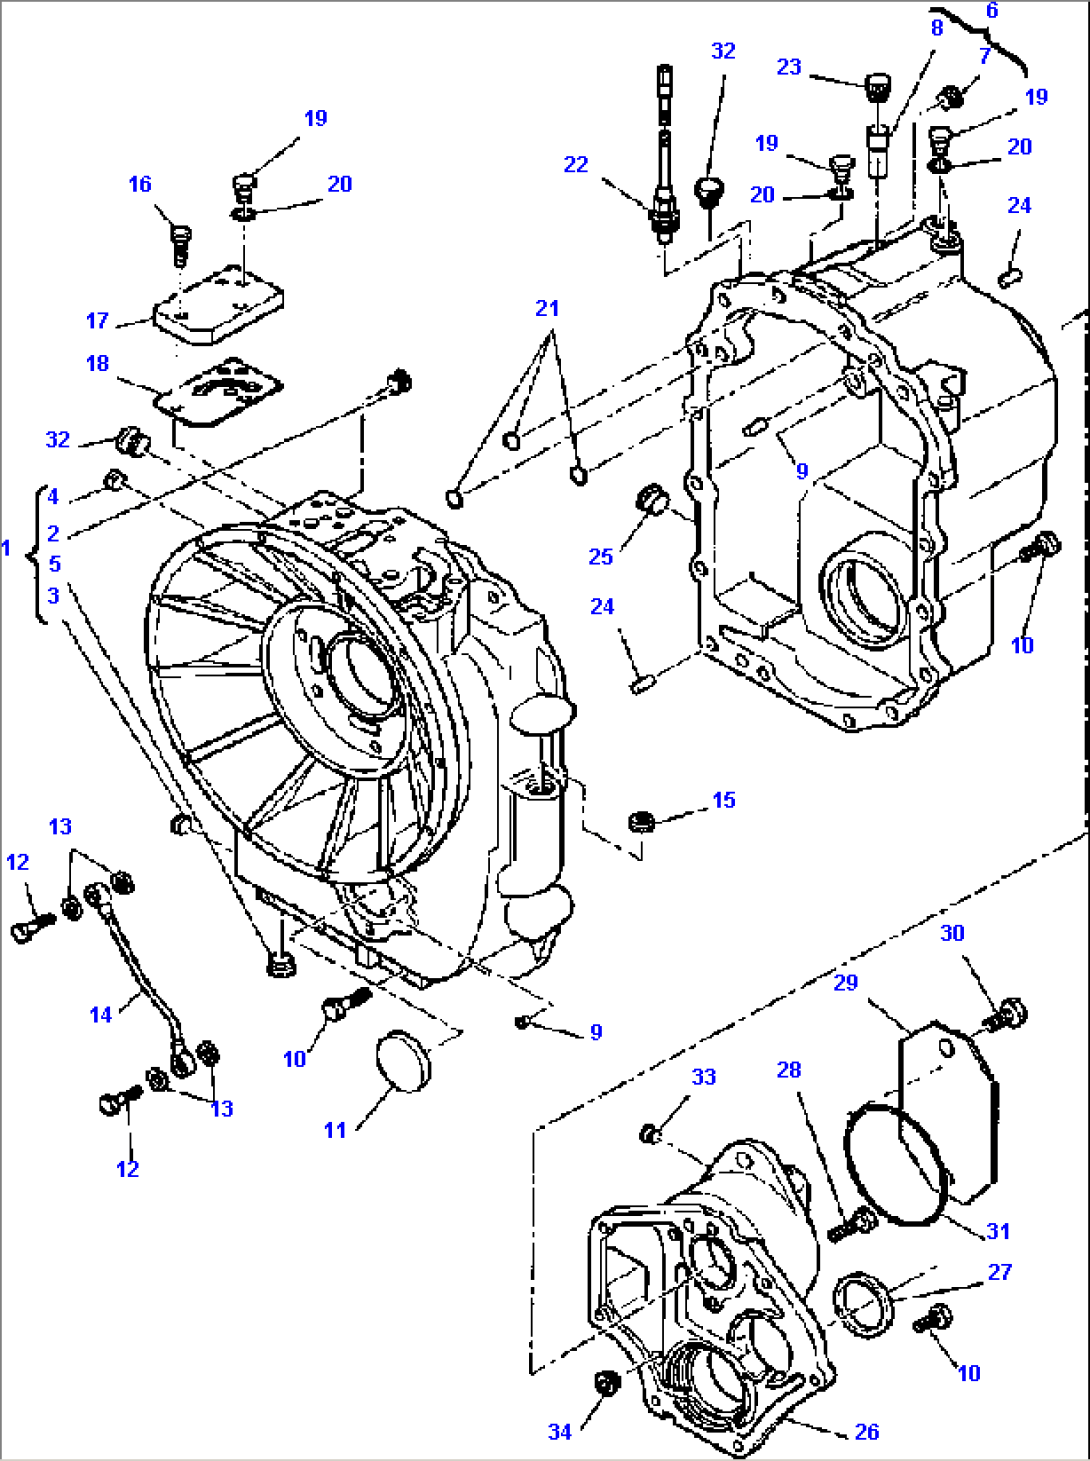 FIG. F3300-01A0 TRANSMISSION (2WD) - FRONT AND REAR HOUSING